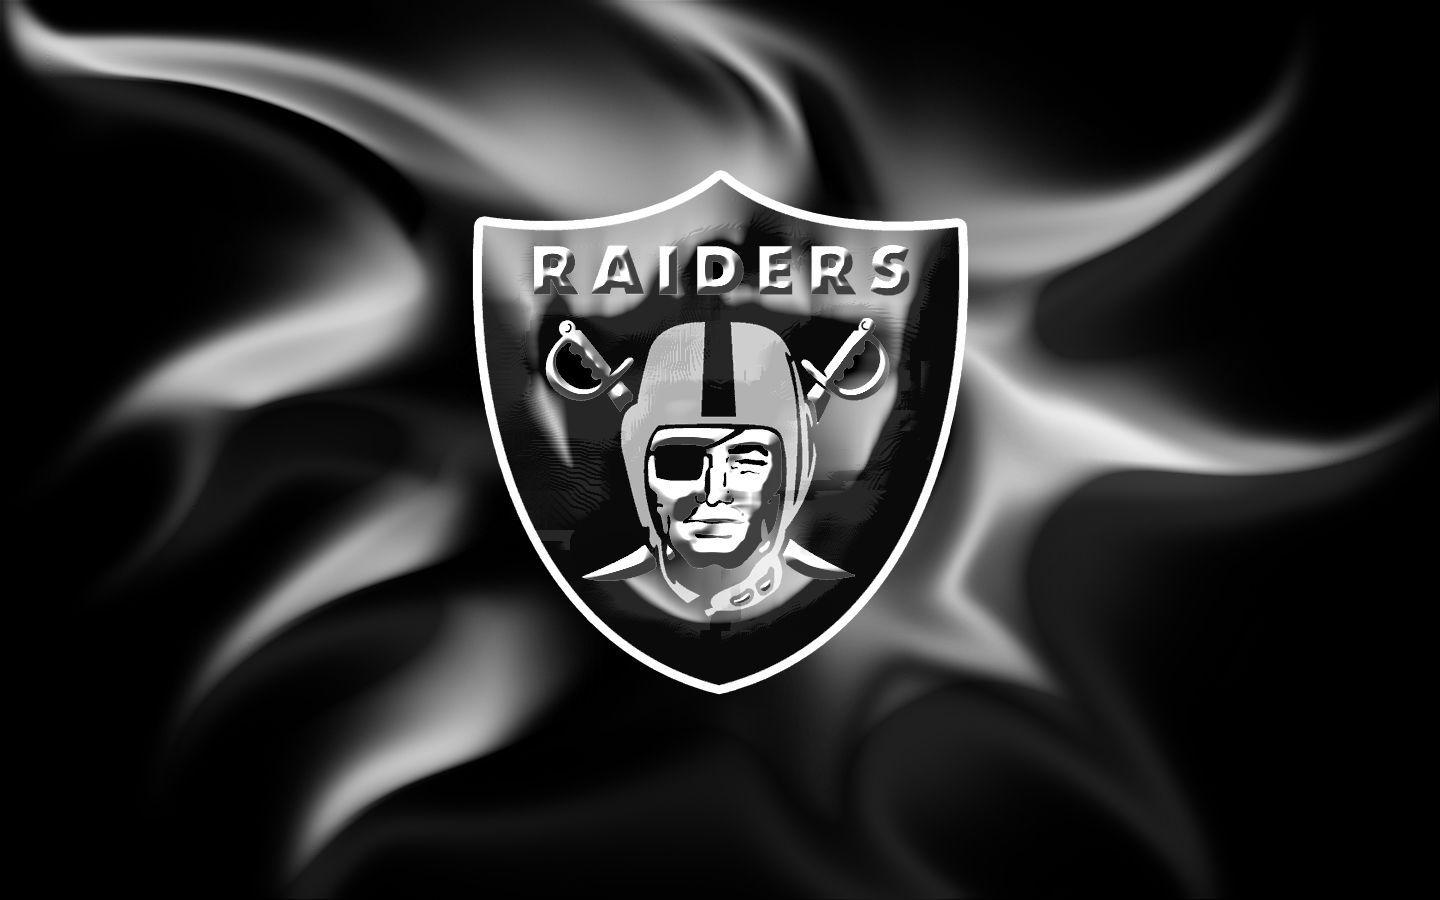 Cool Raiders Wallpapers - Top Free Cool